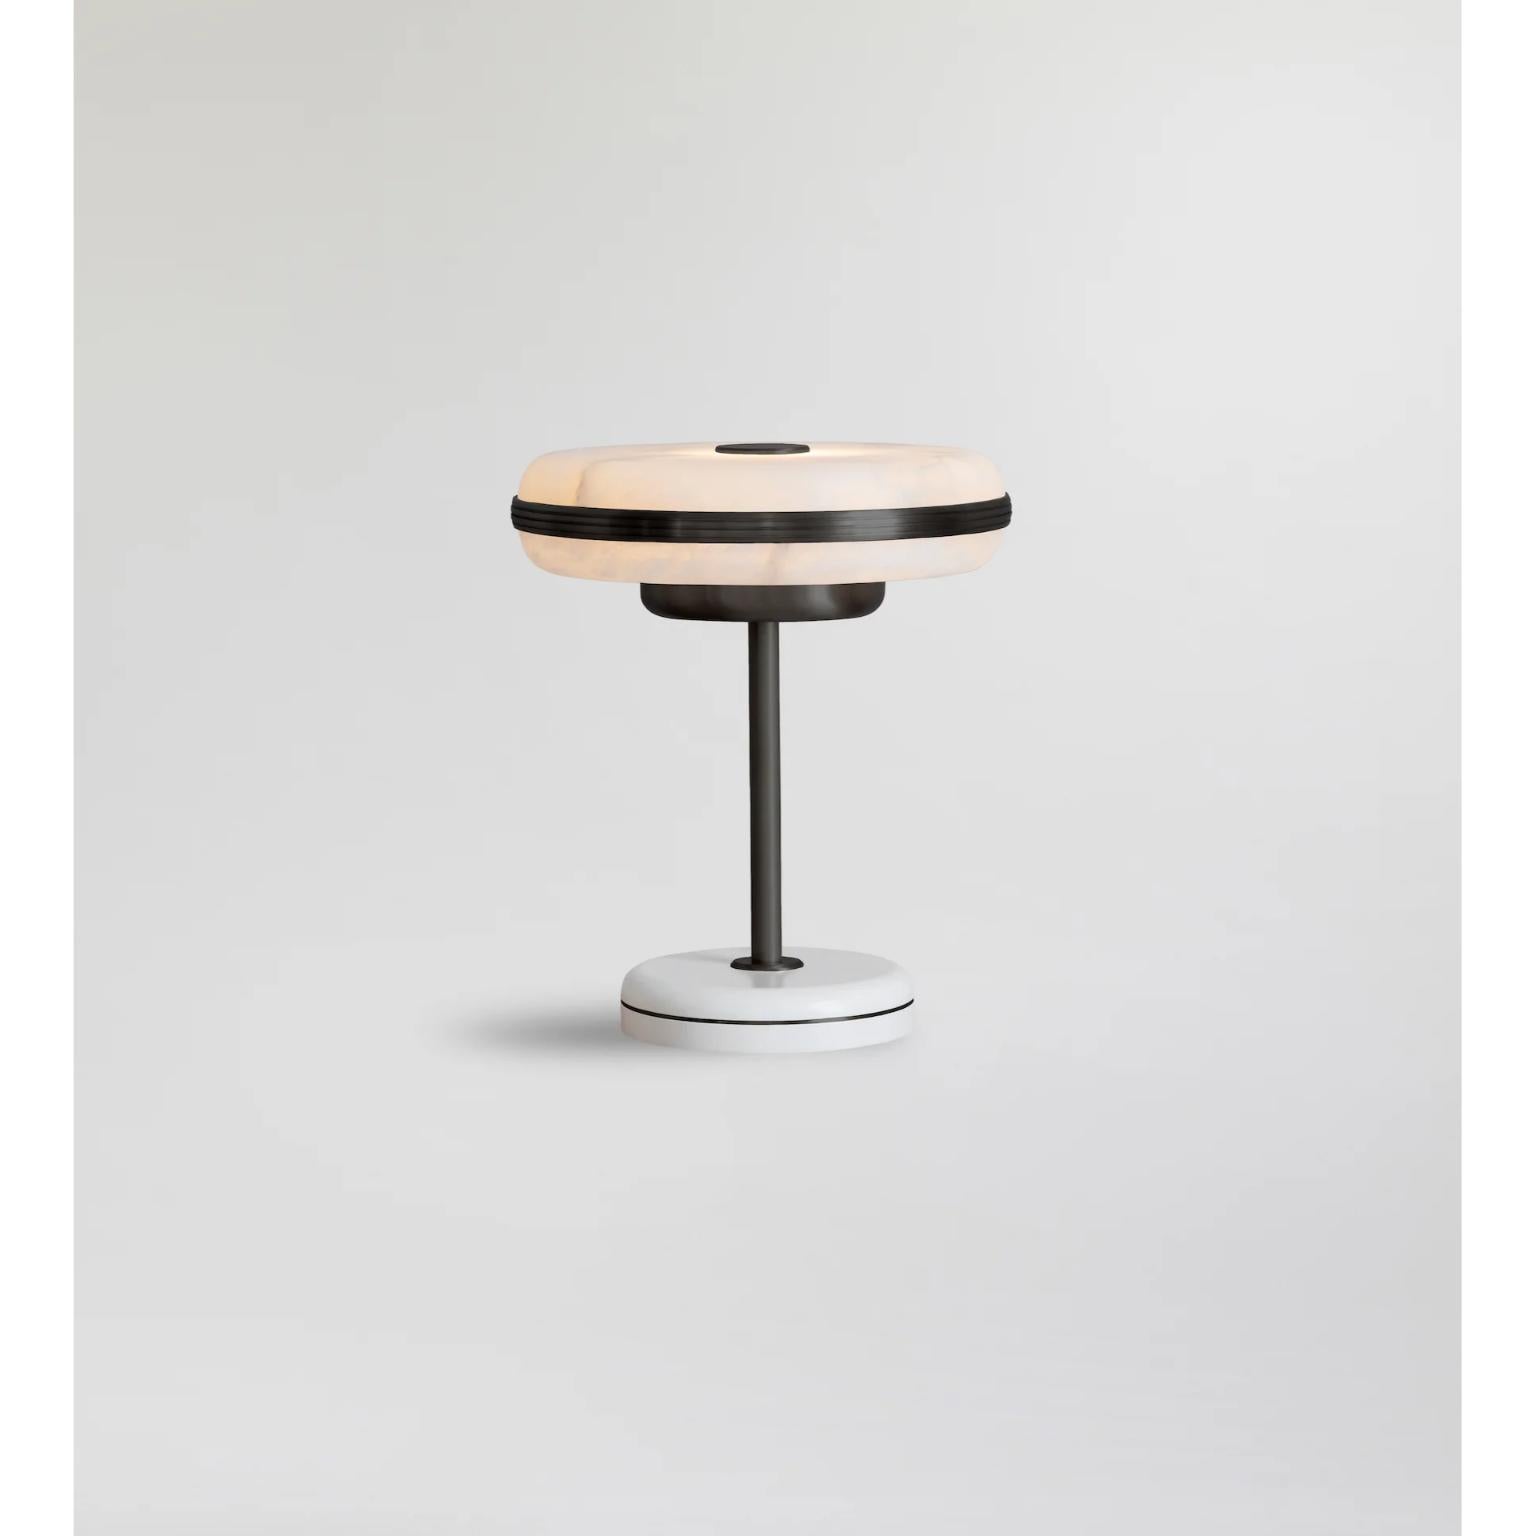 Beran Dark Bronze Small Table Lamp by Bert Frank
Dimensions: Ø 26 x H 28 cm.
Materials: Bronze and alabaster.
Base finish: Satin white.

Available in two different sizes. Available in different finishes and materials. Please contact us. 

The